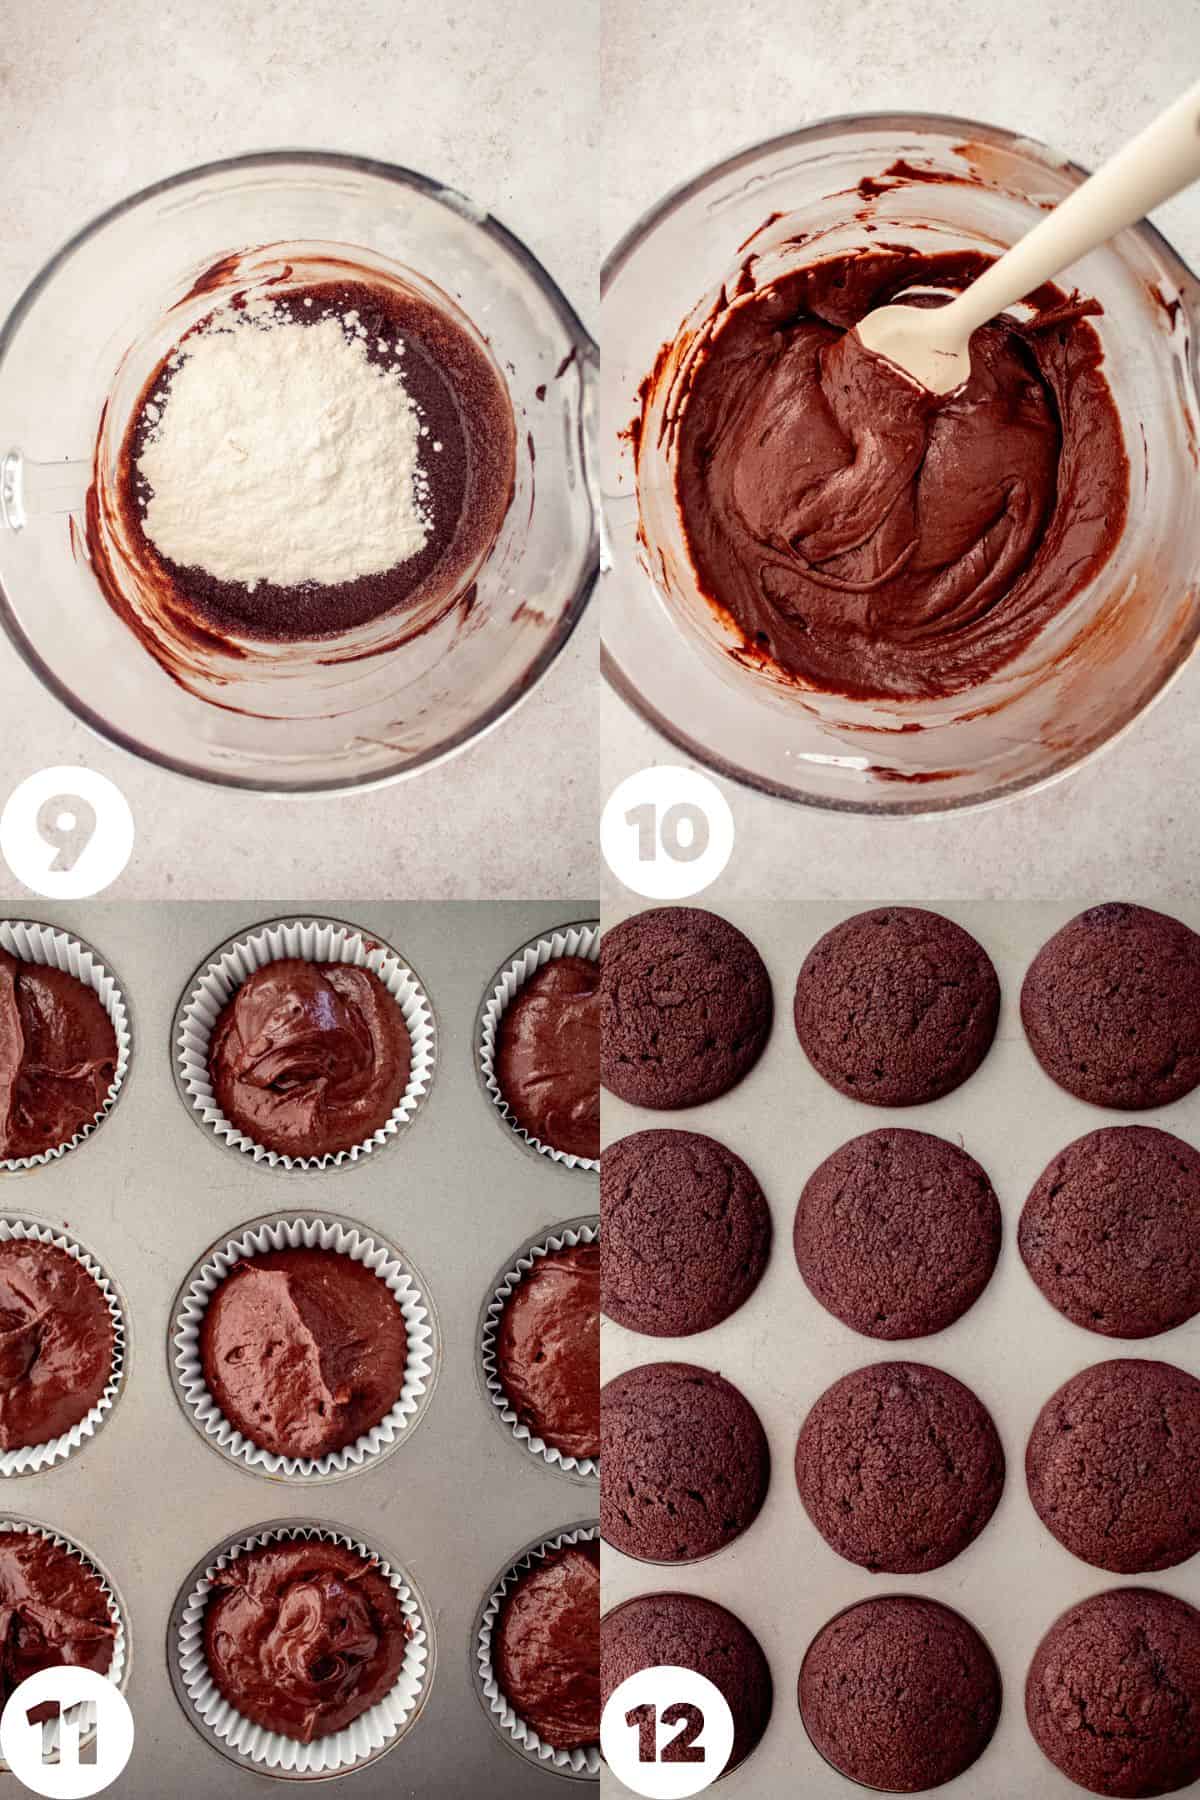 step by step photos - dry ingredients added, mixed in, batter portioned into cupcake liners, baked cupcakes